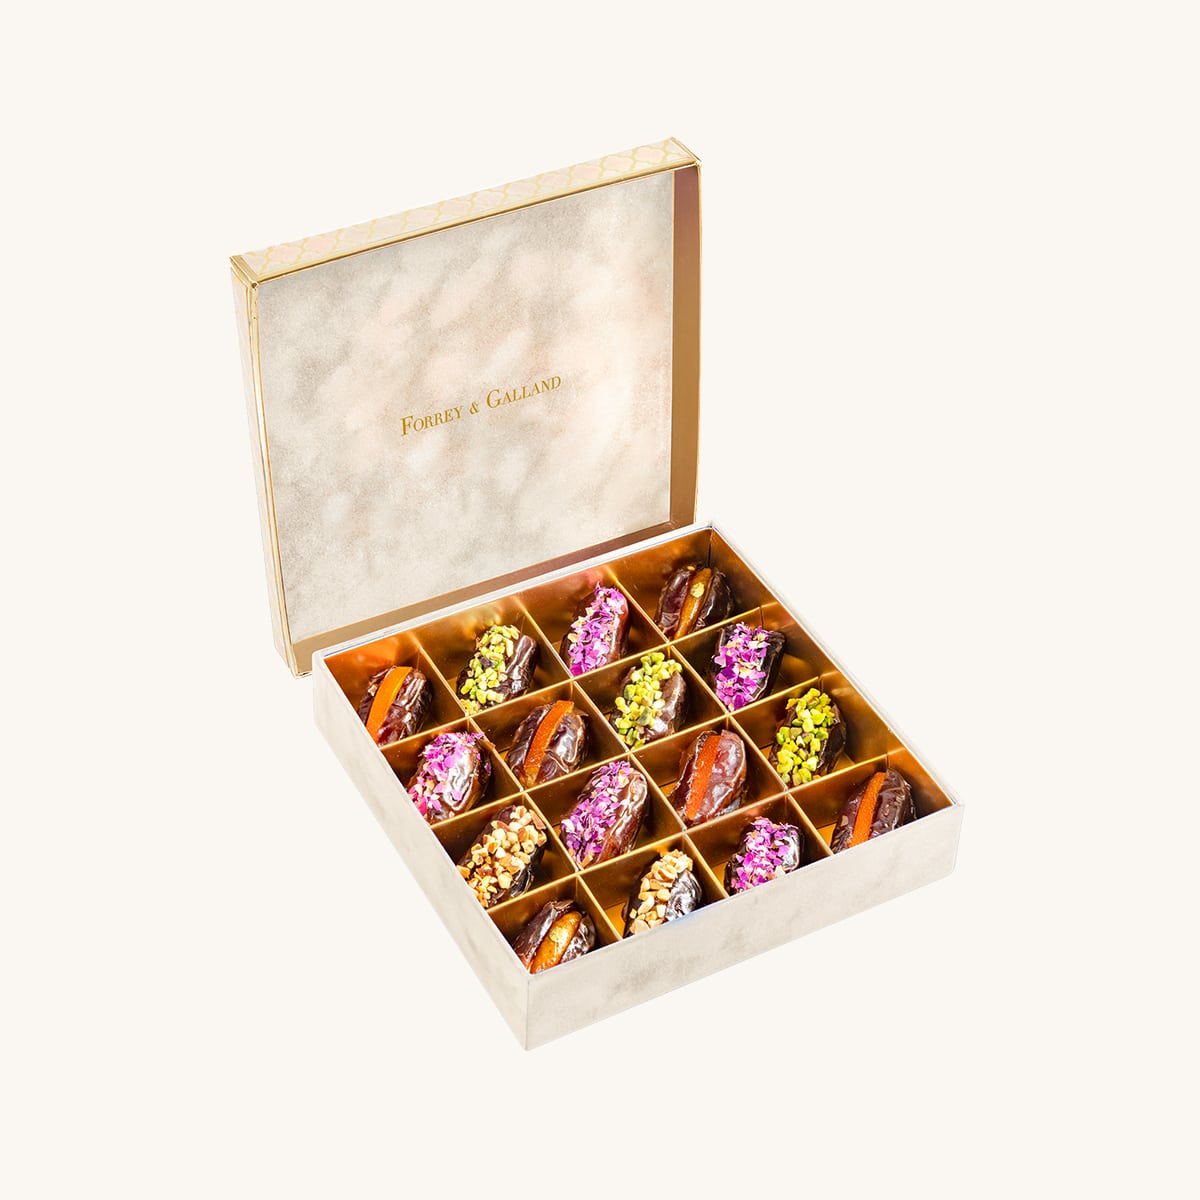 Forrey & Galland luxury velvet box filled with 16 pieces of premium dates